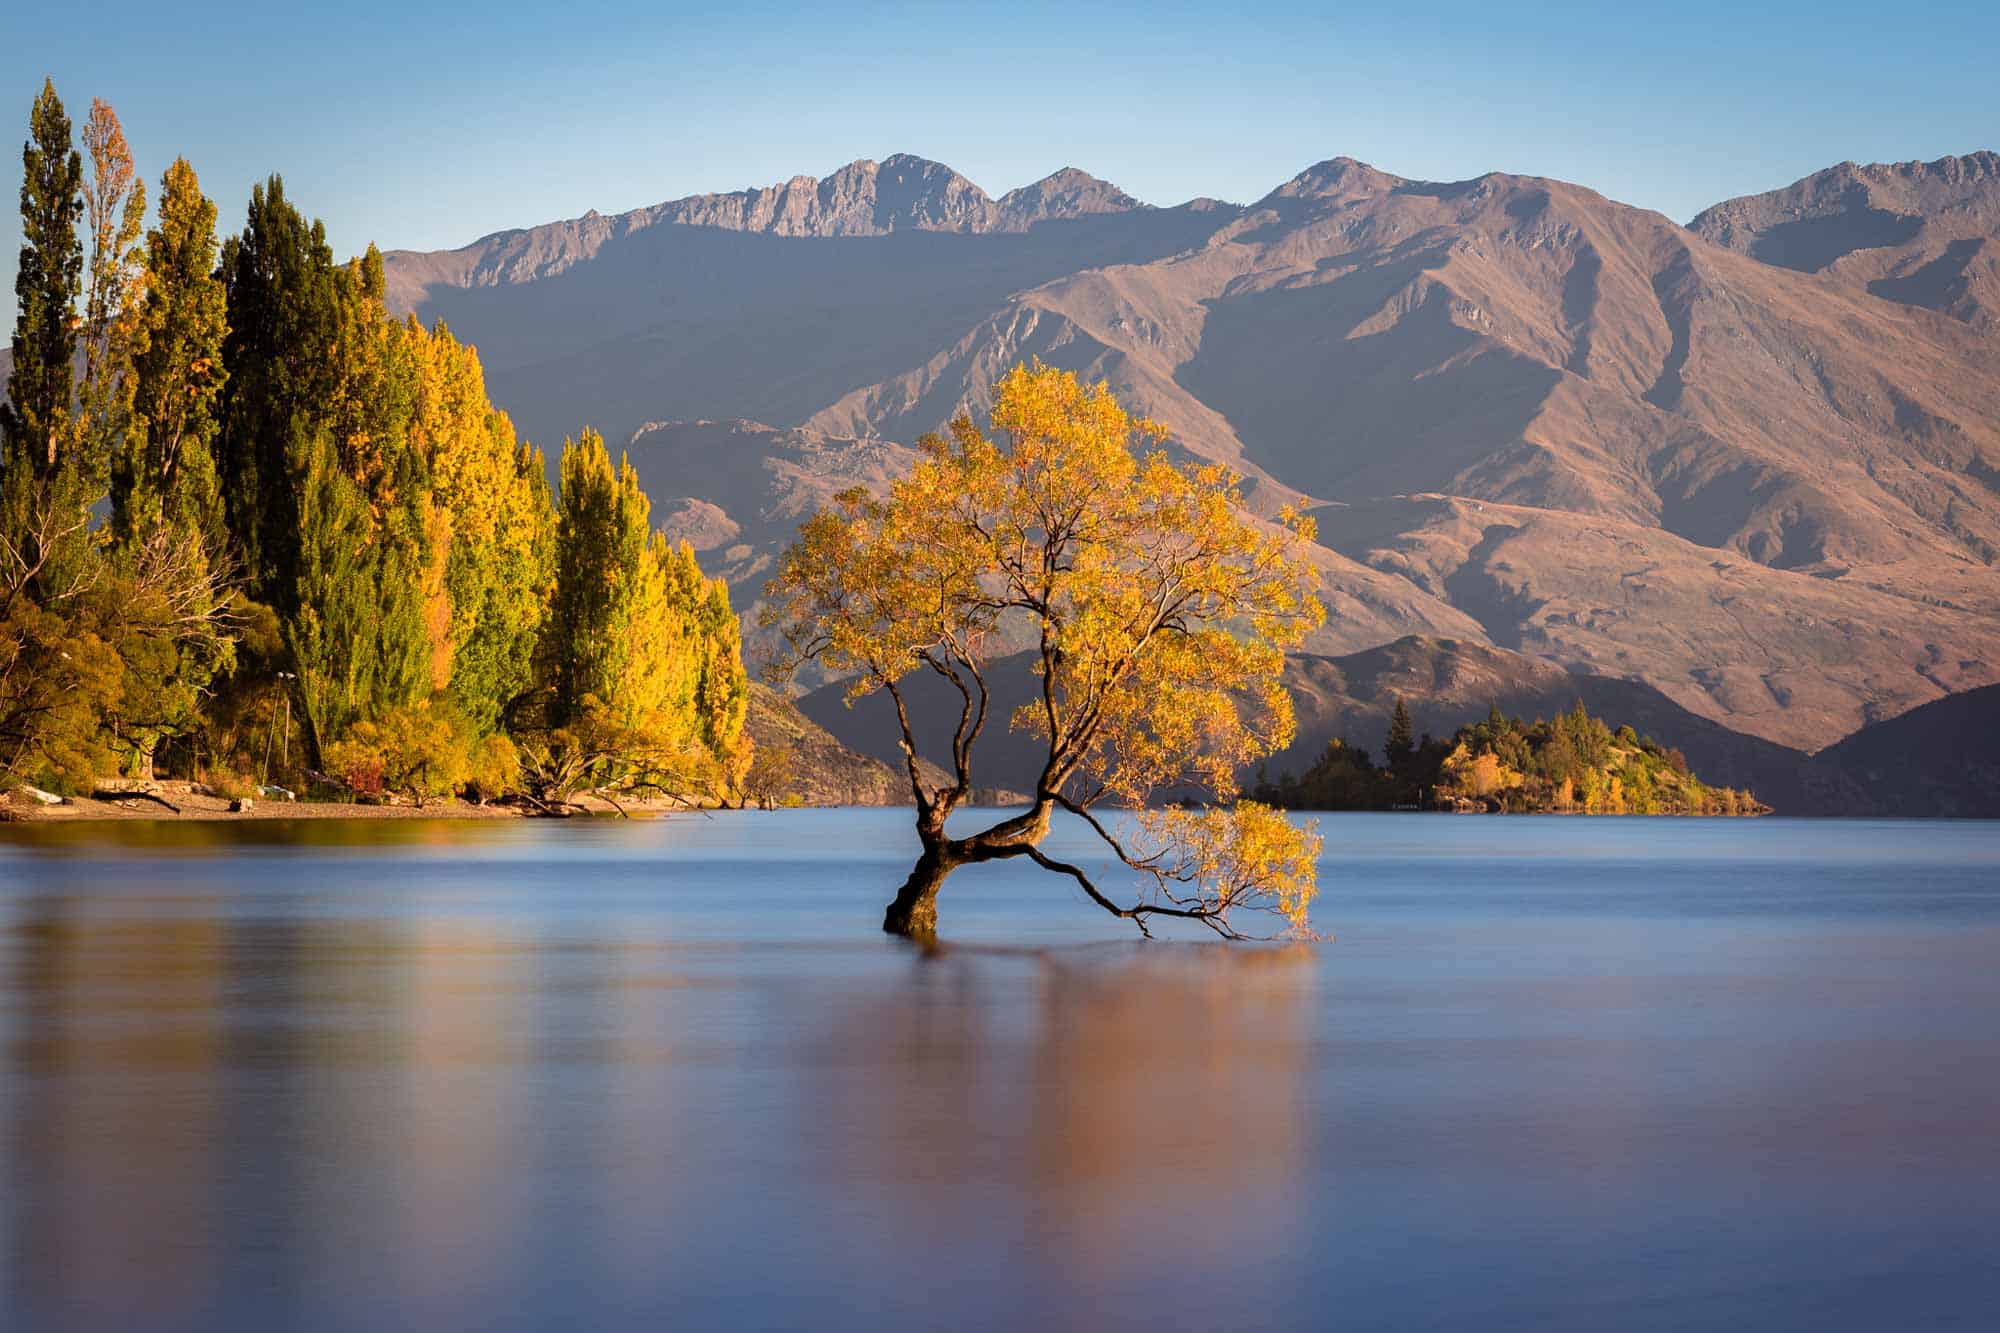 The Ultimate TRAVEL to NEW ZEALAND Guide (2021 Edition)